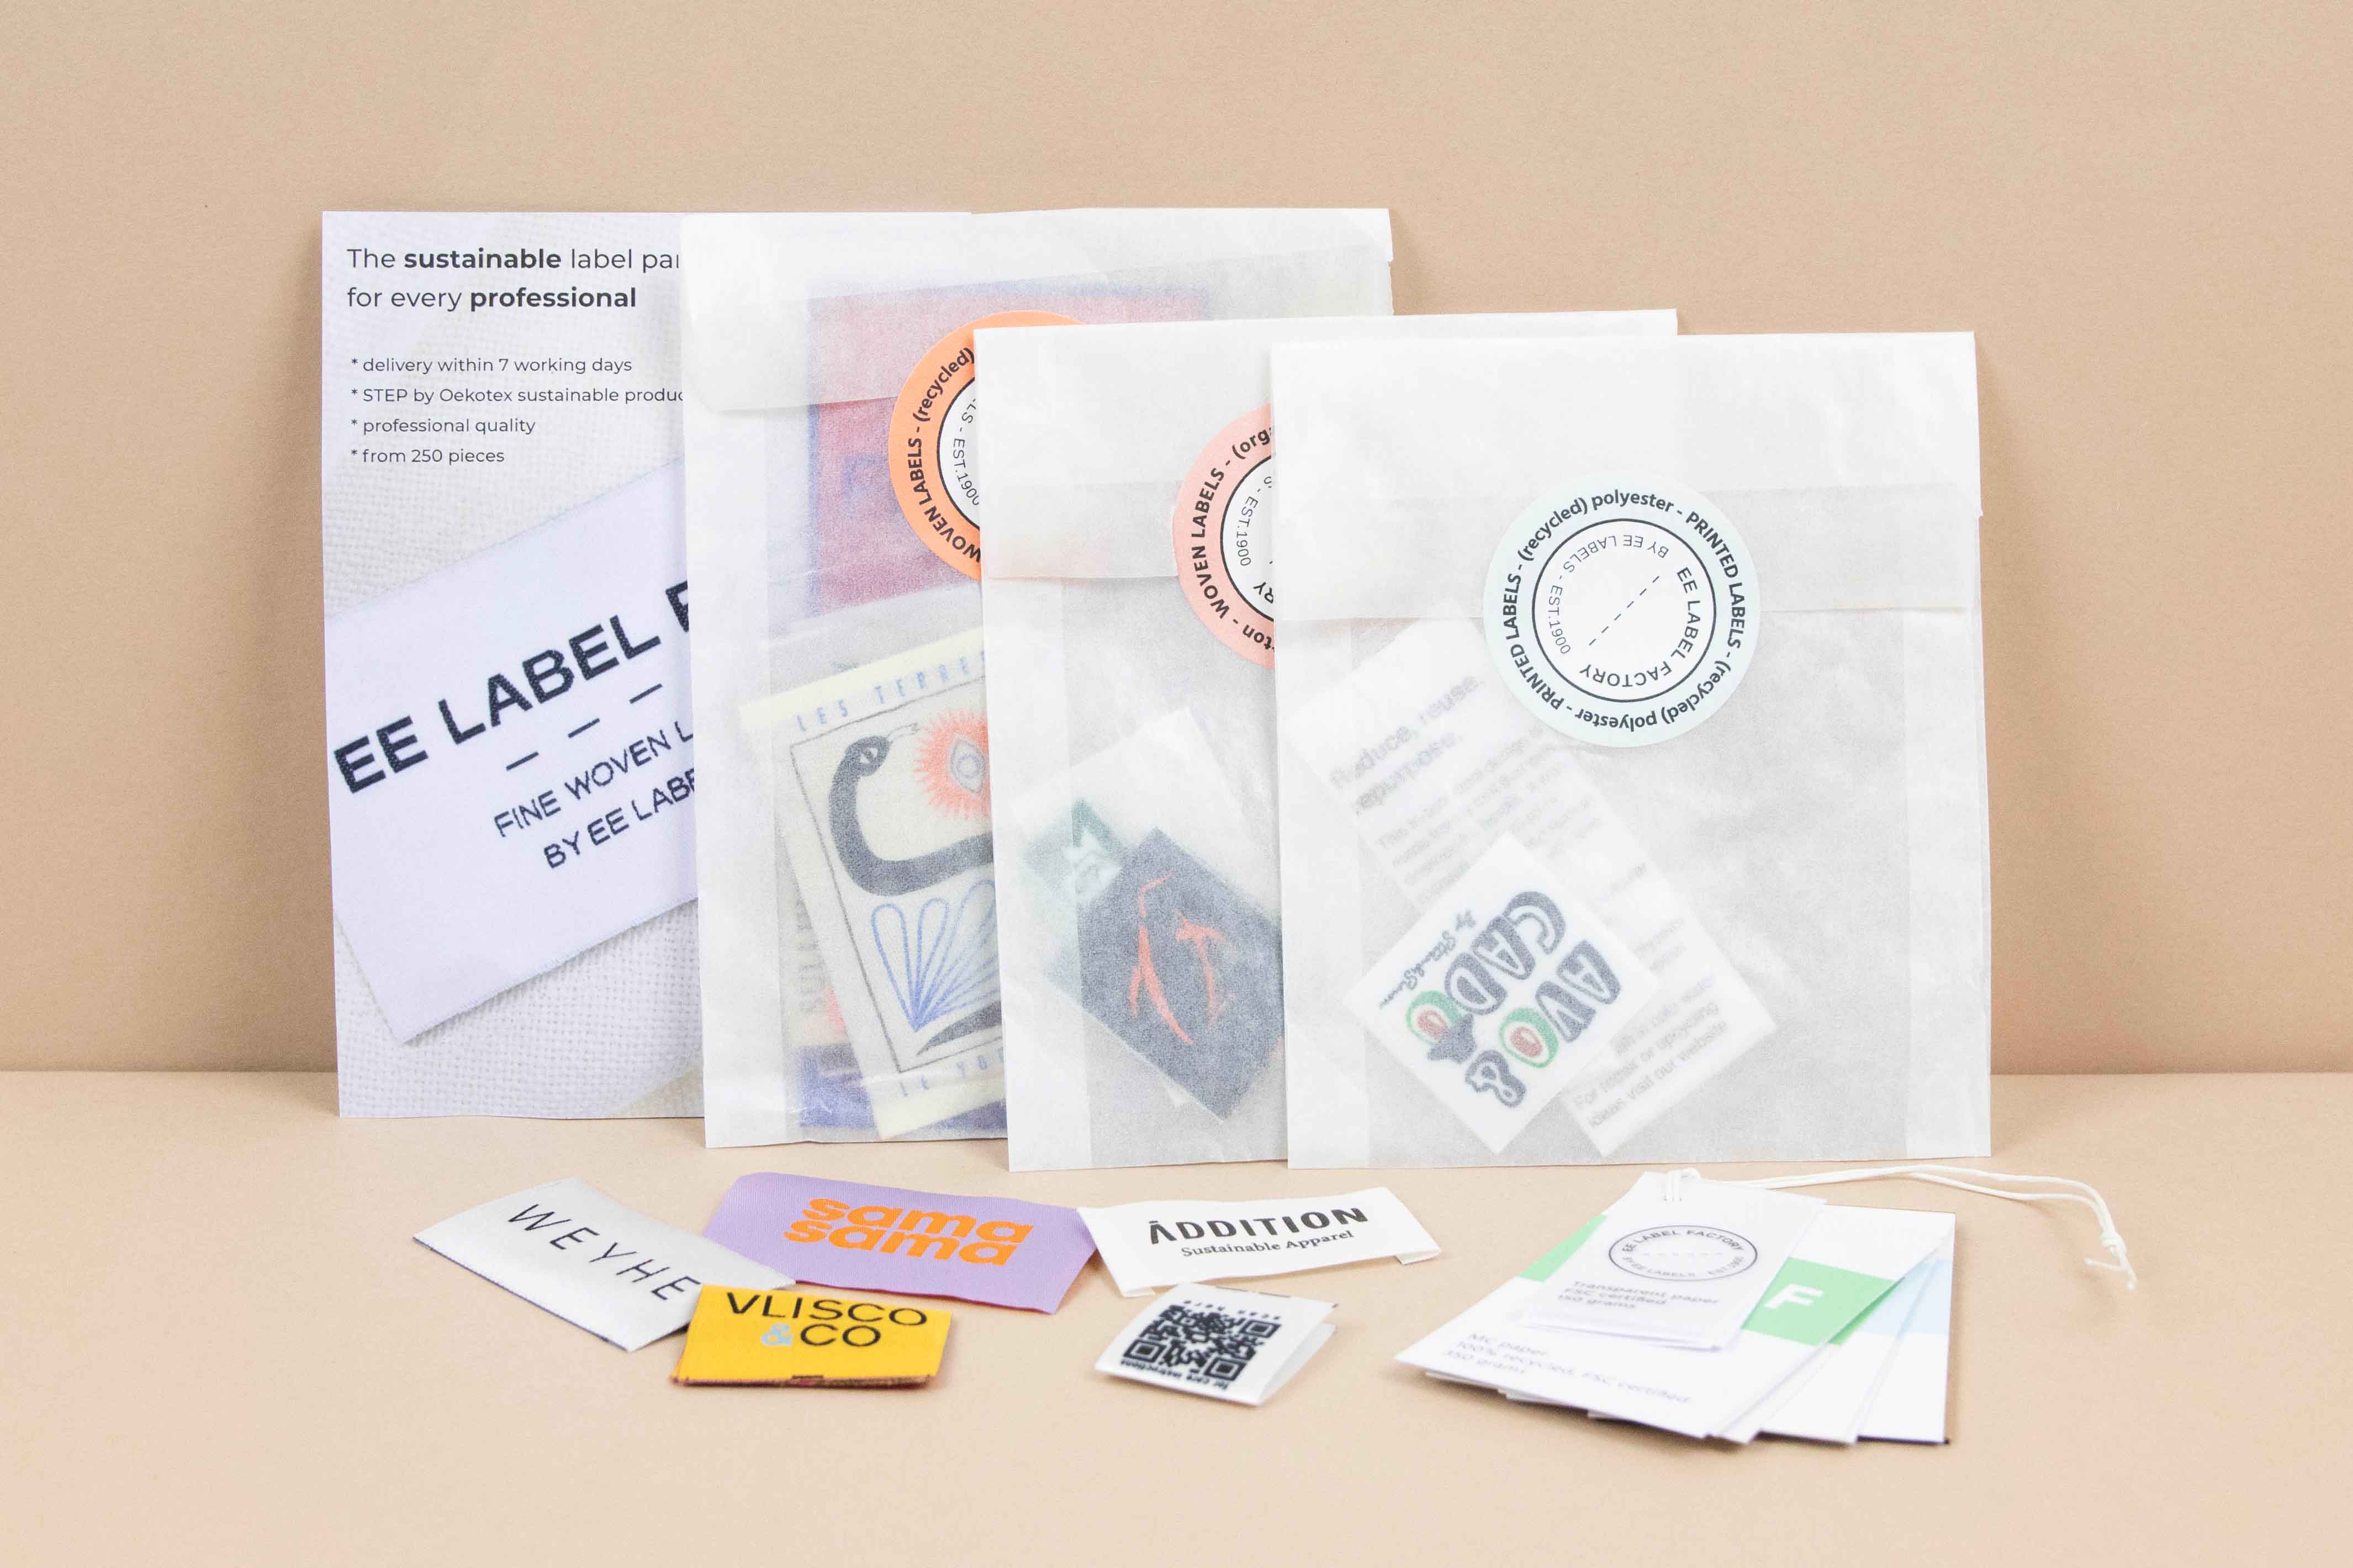 Mail-in free sample packs